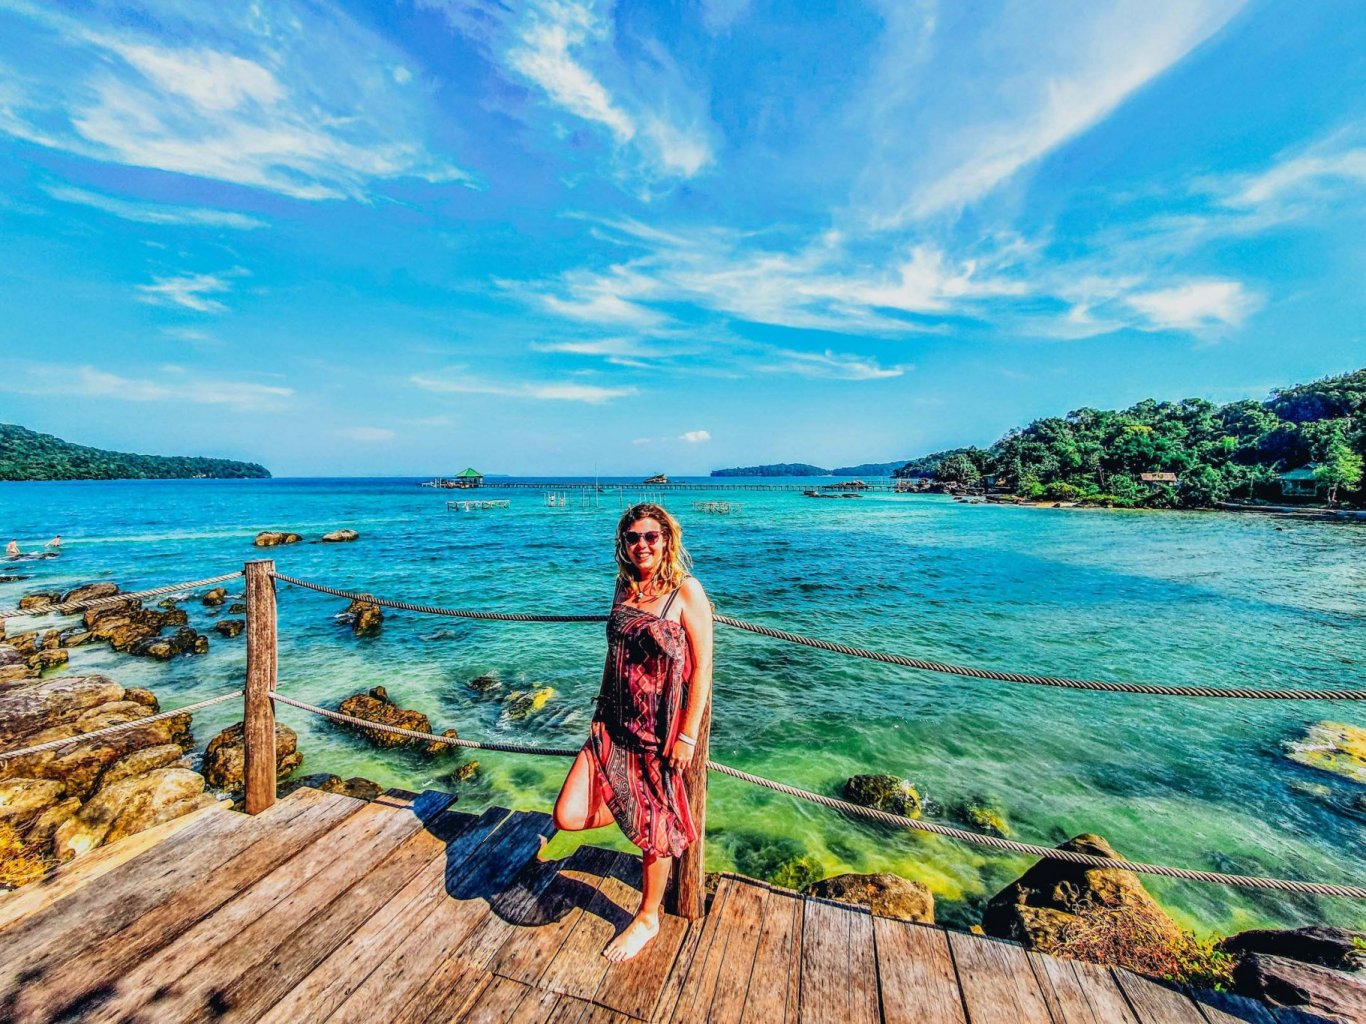 TruTravels Koh Rong Beach in Cambodia